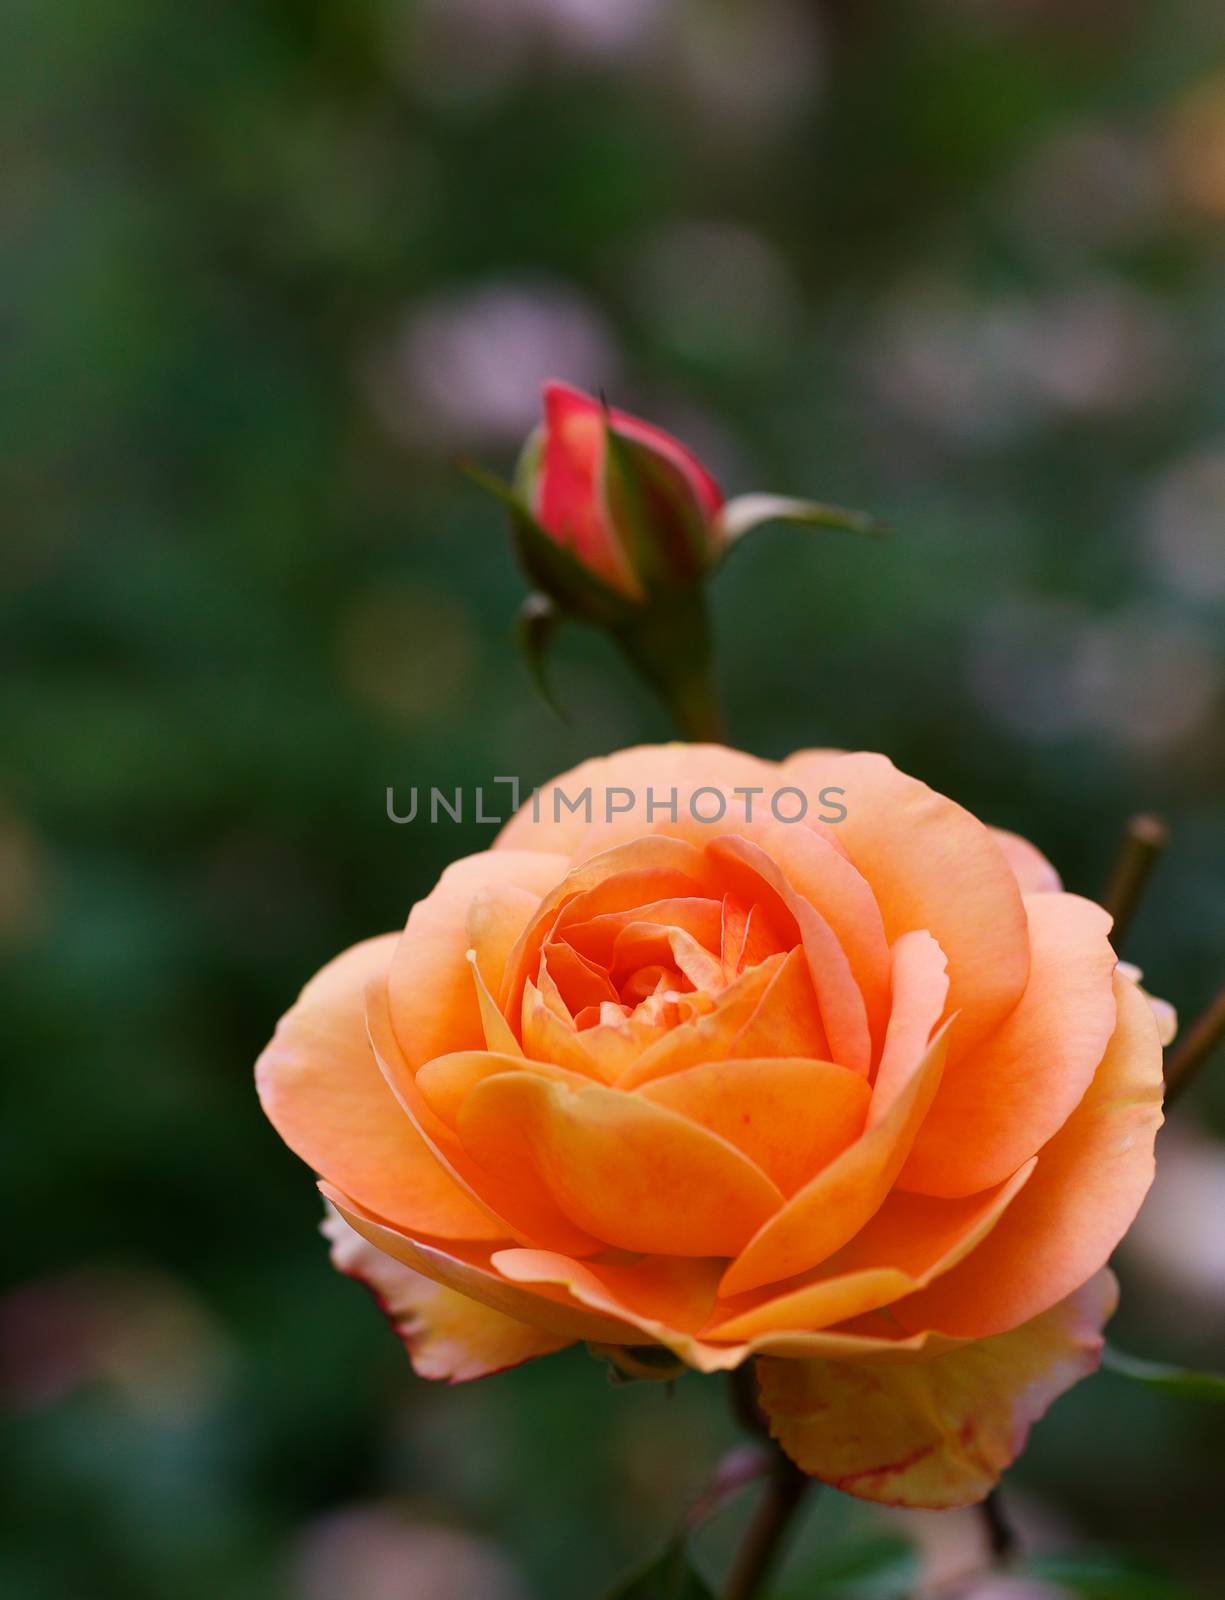 Orange rose with red bud and soft focus green plant background